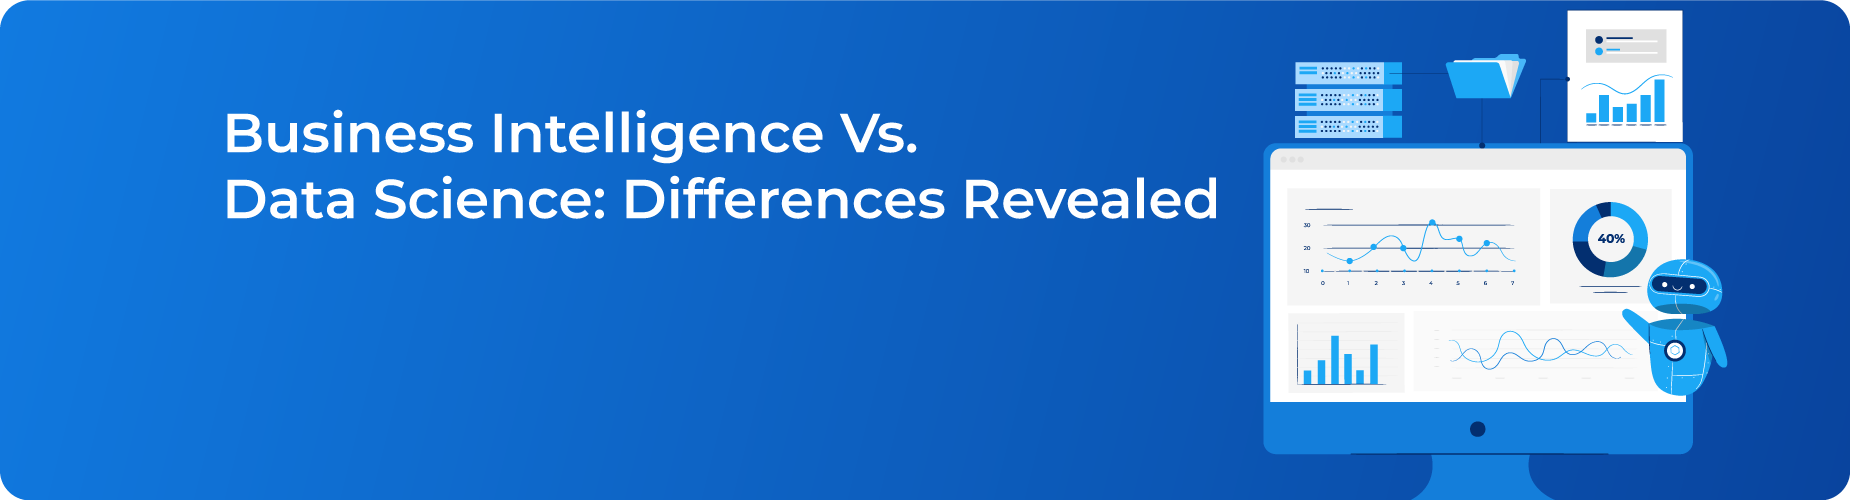 Business Intelligence Vs. Data Science experts